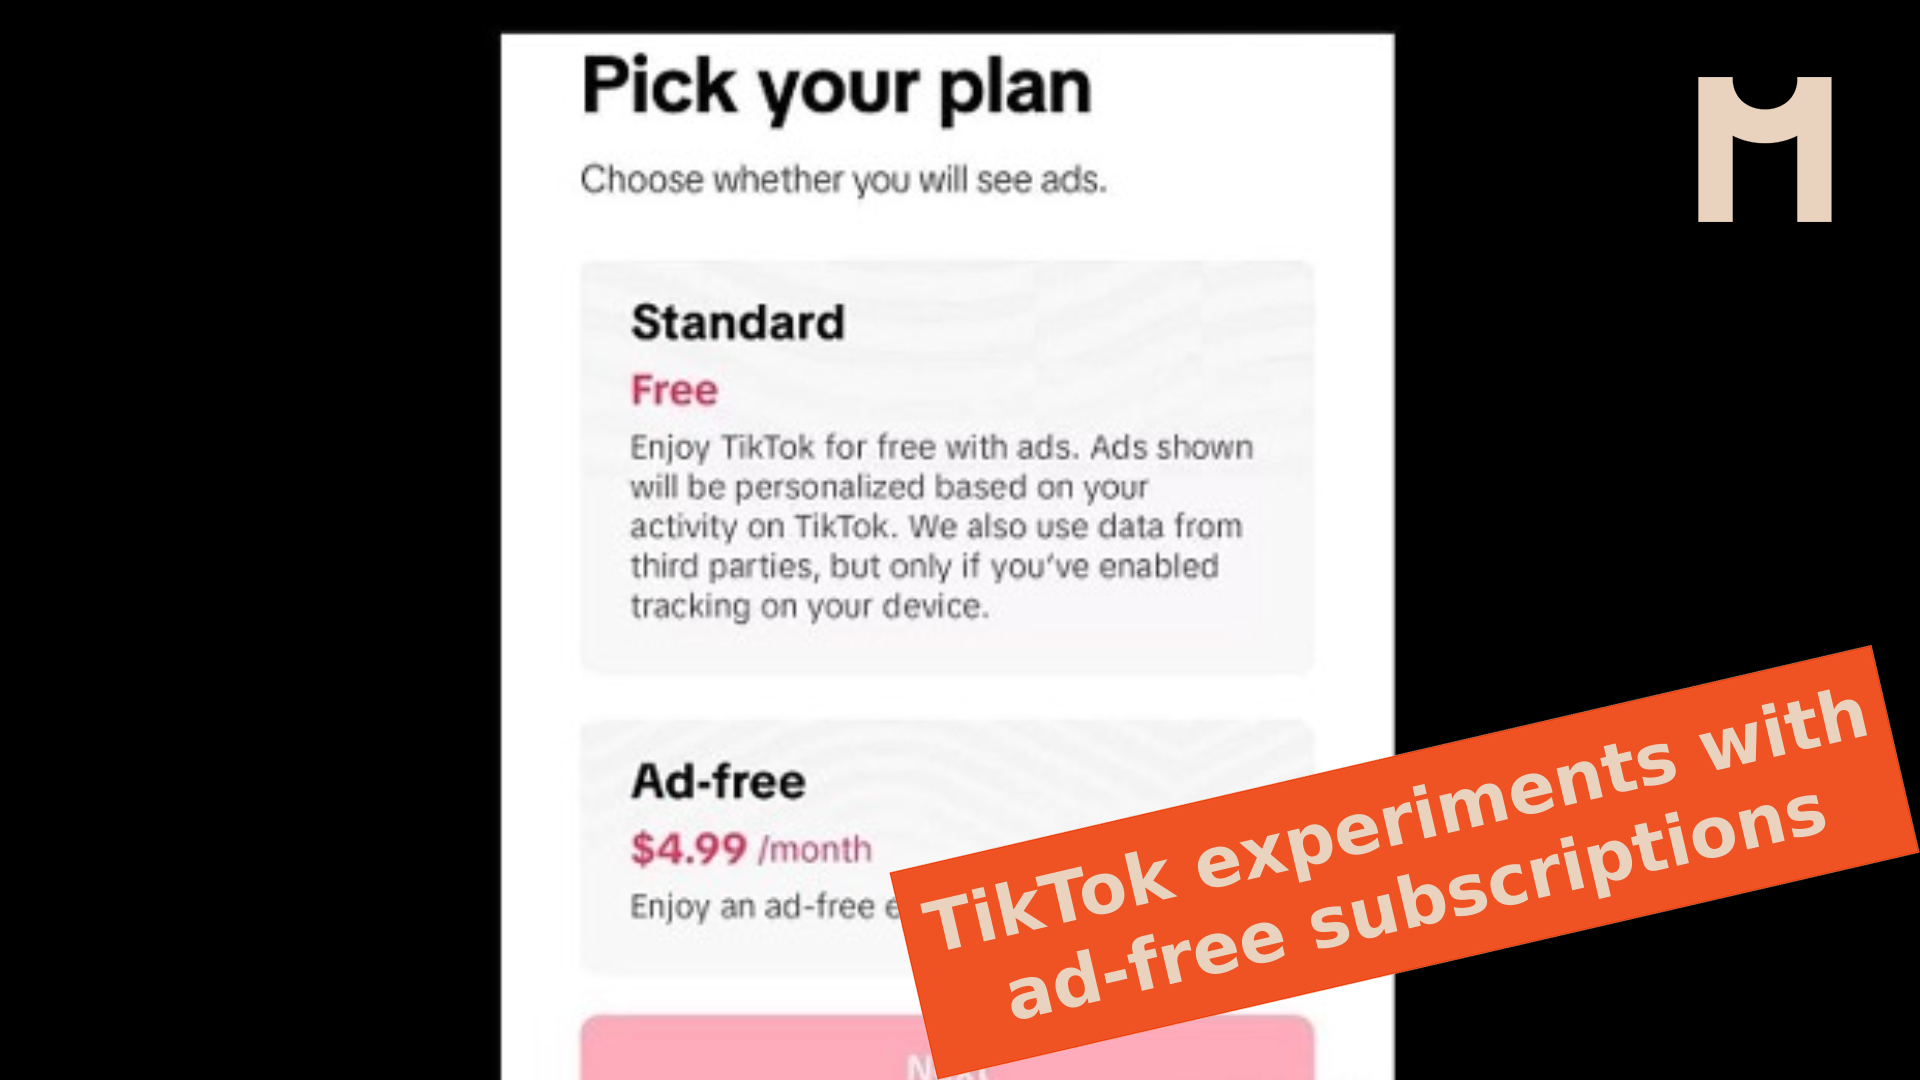 TikTok experiments with ad-free subscriptions